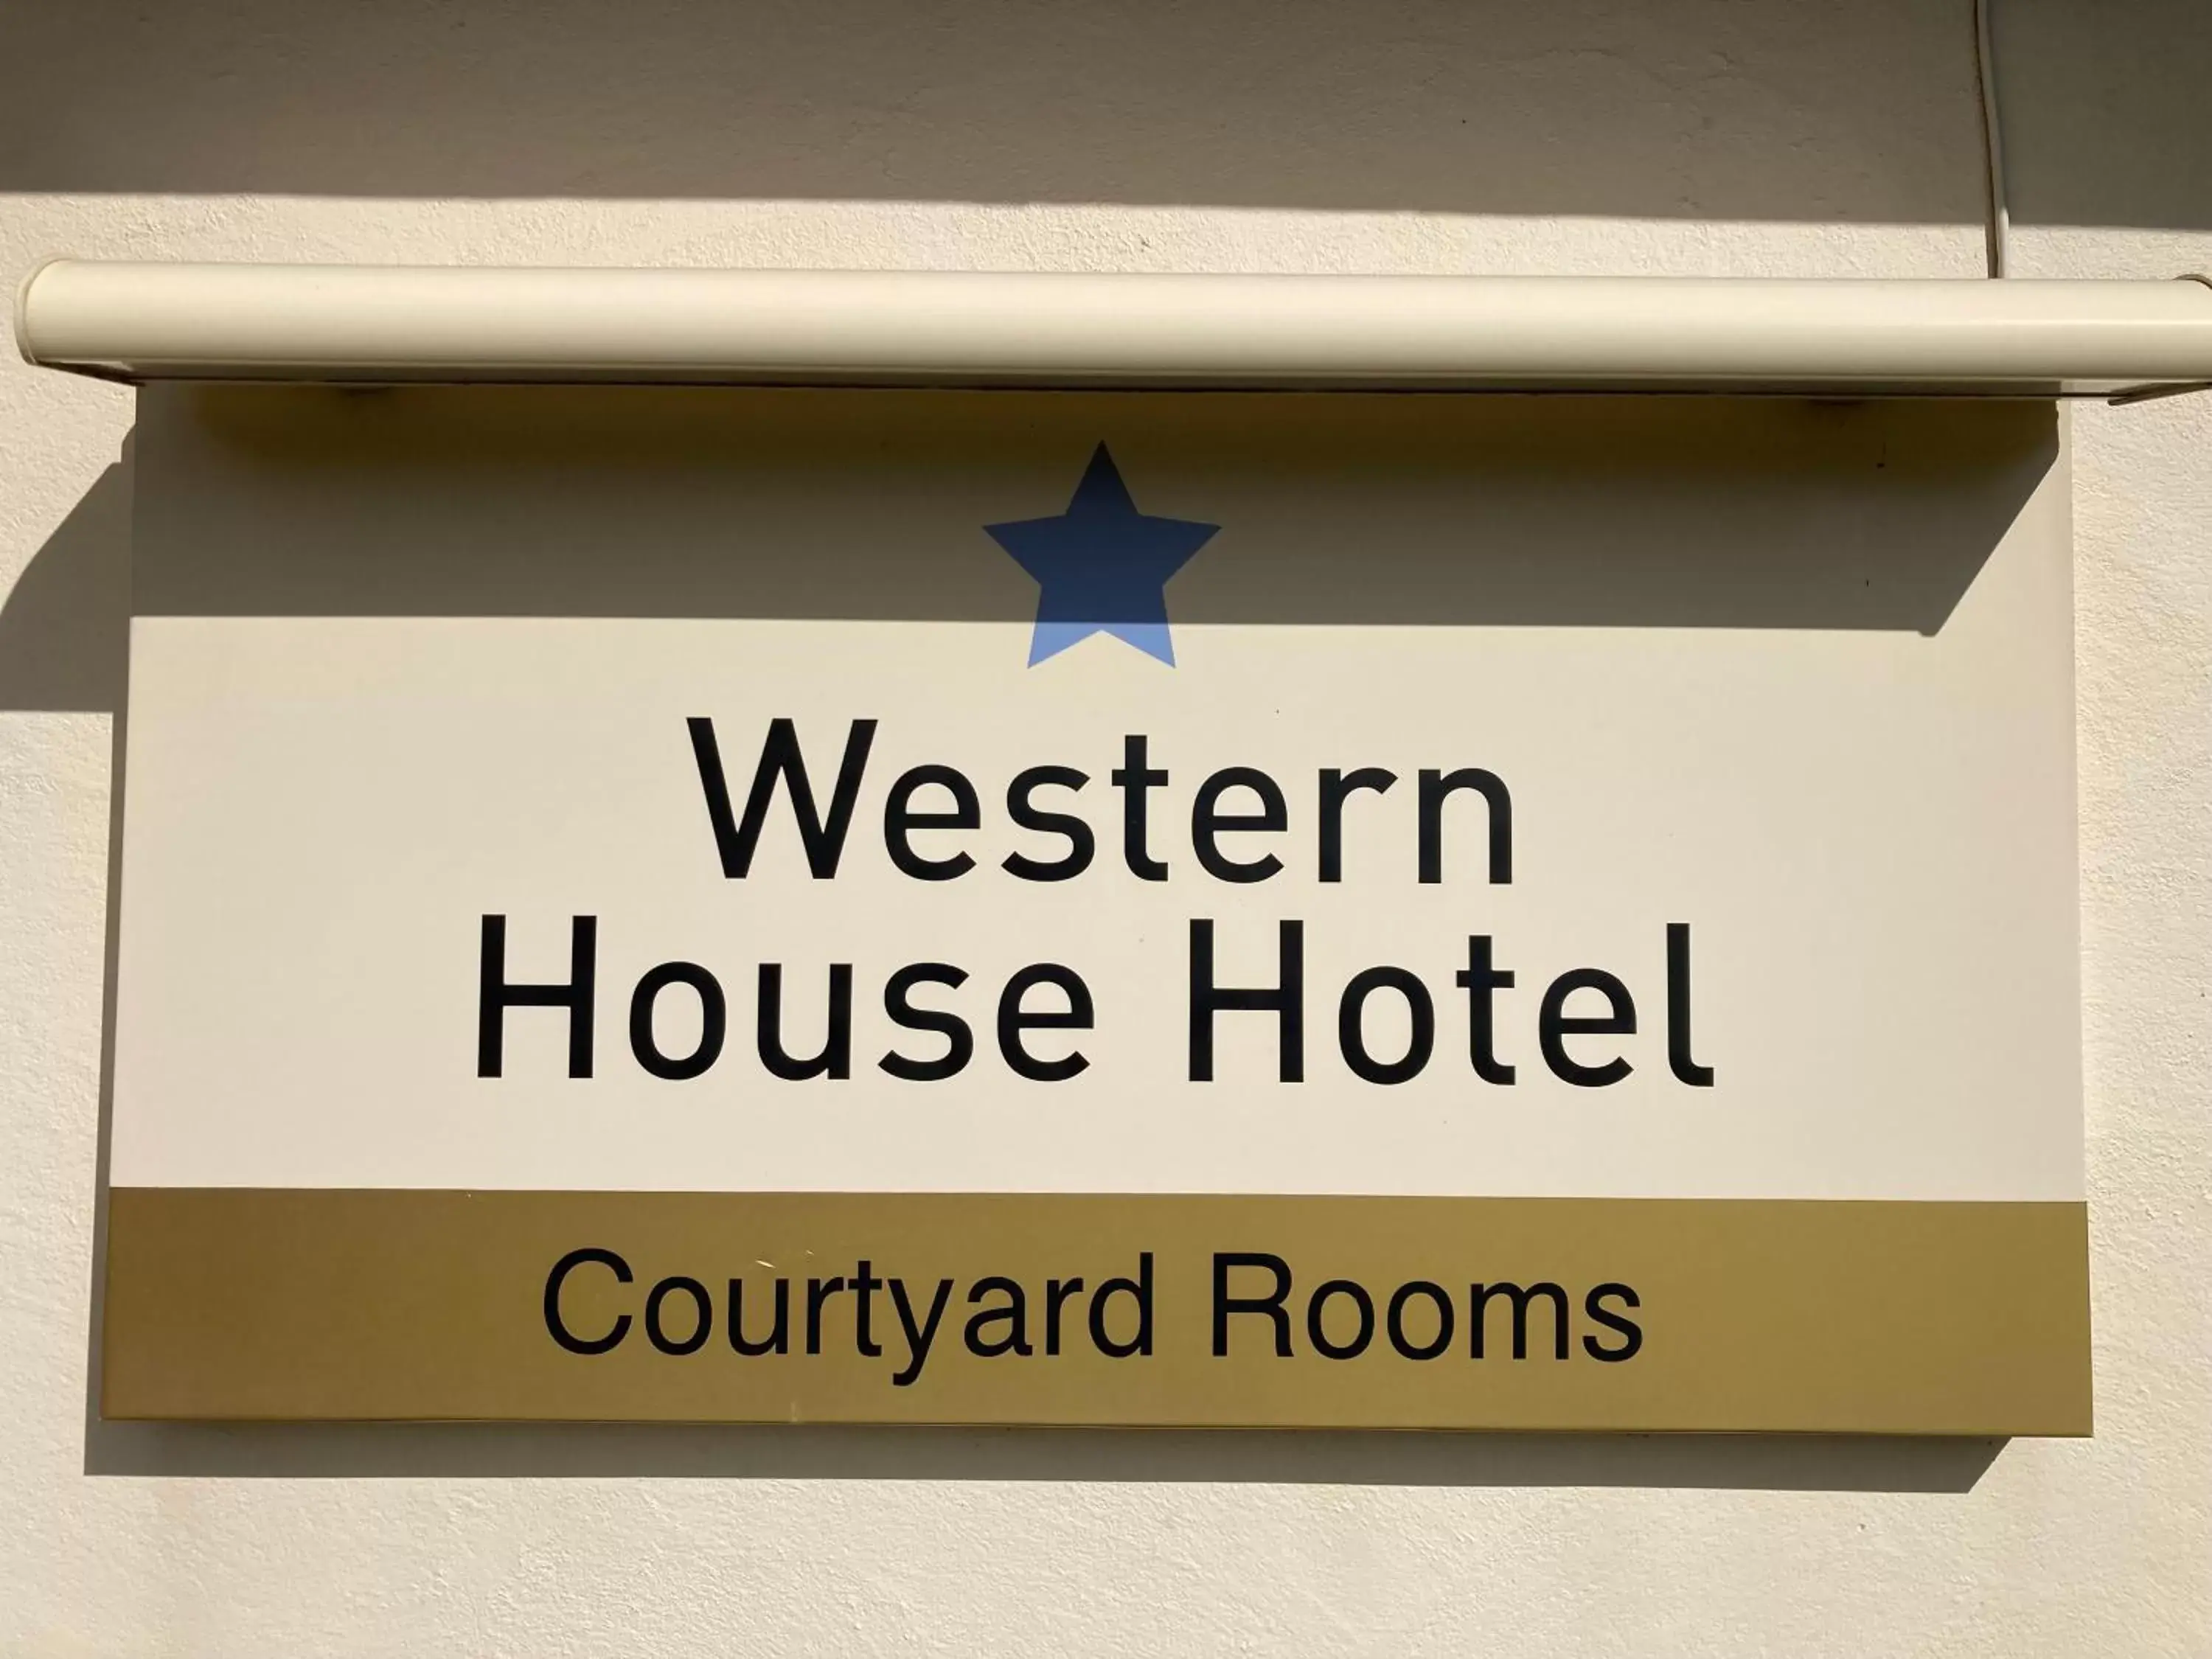 Property logo or sign in Western House Hotel